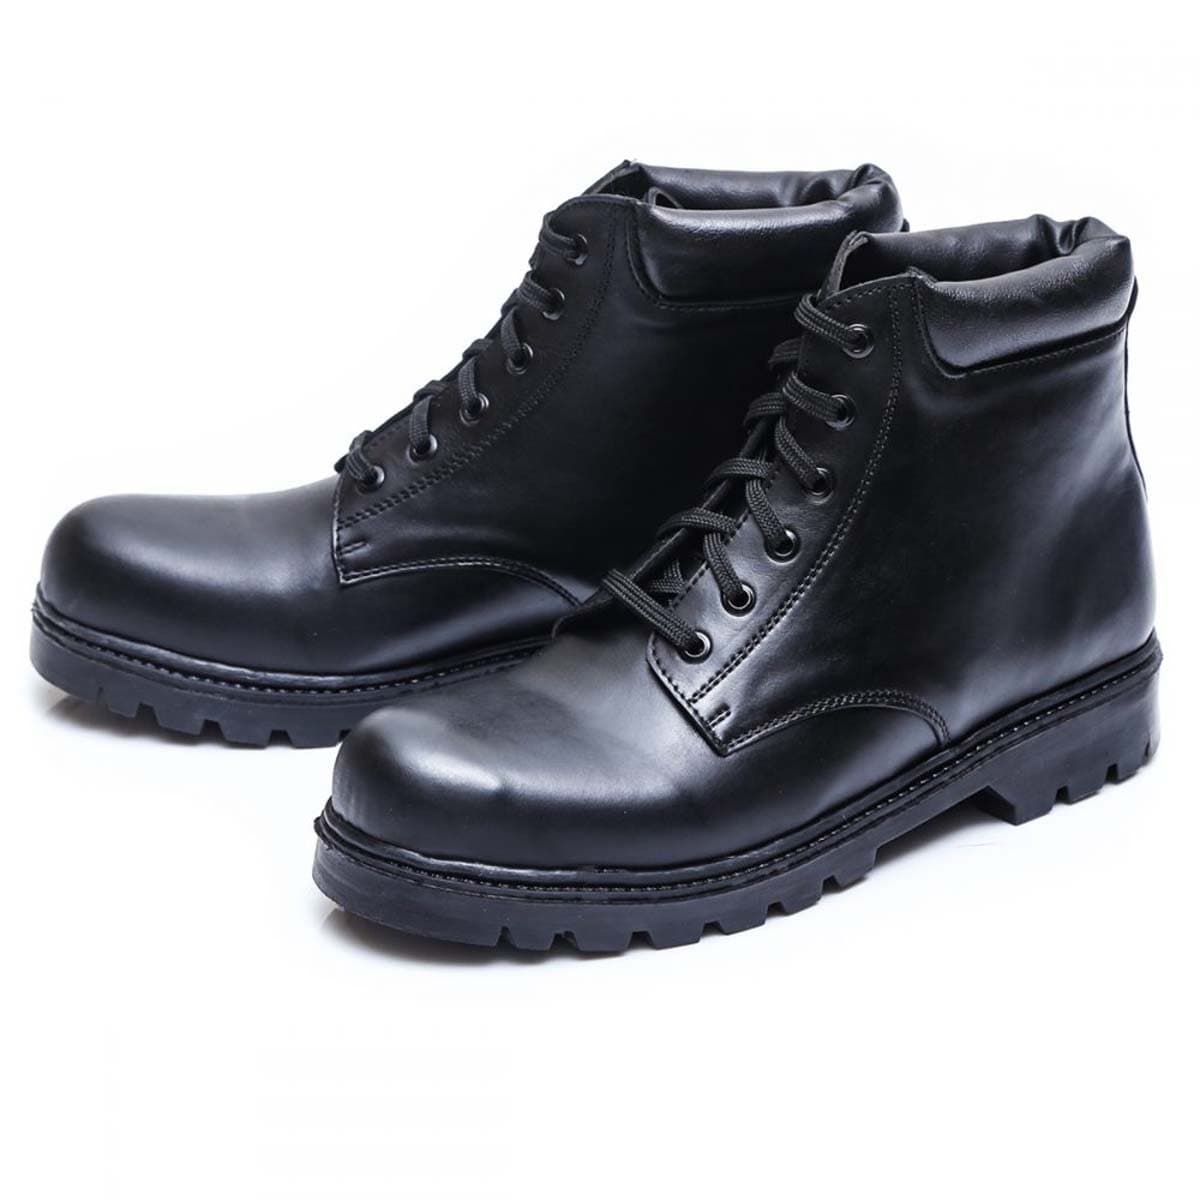 Granbo leather boot for men - AK-004